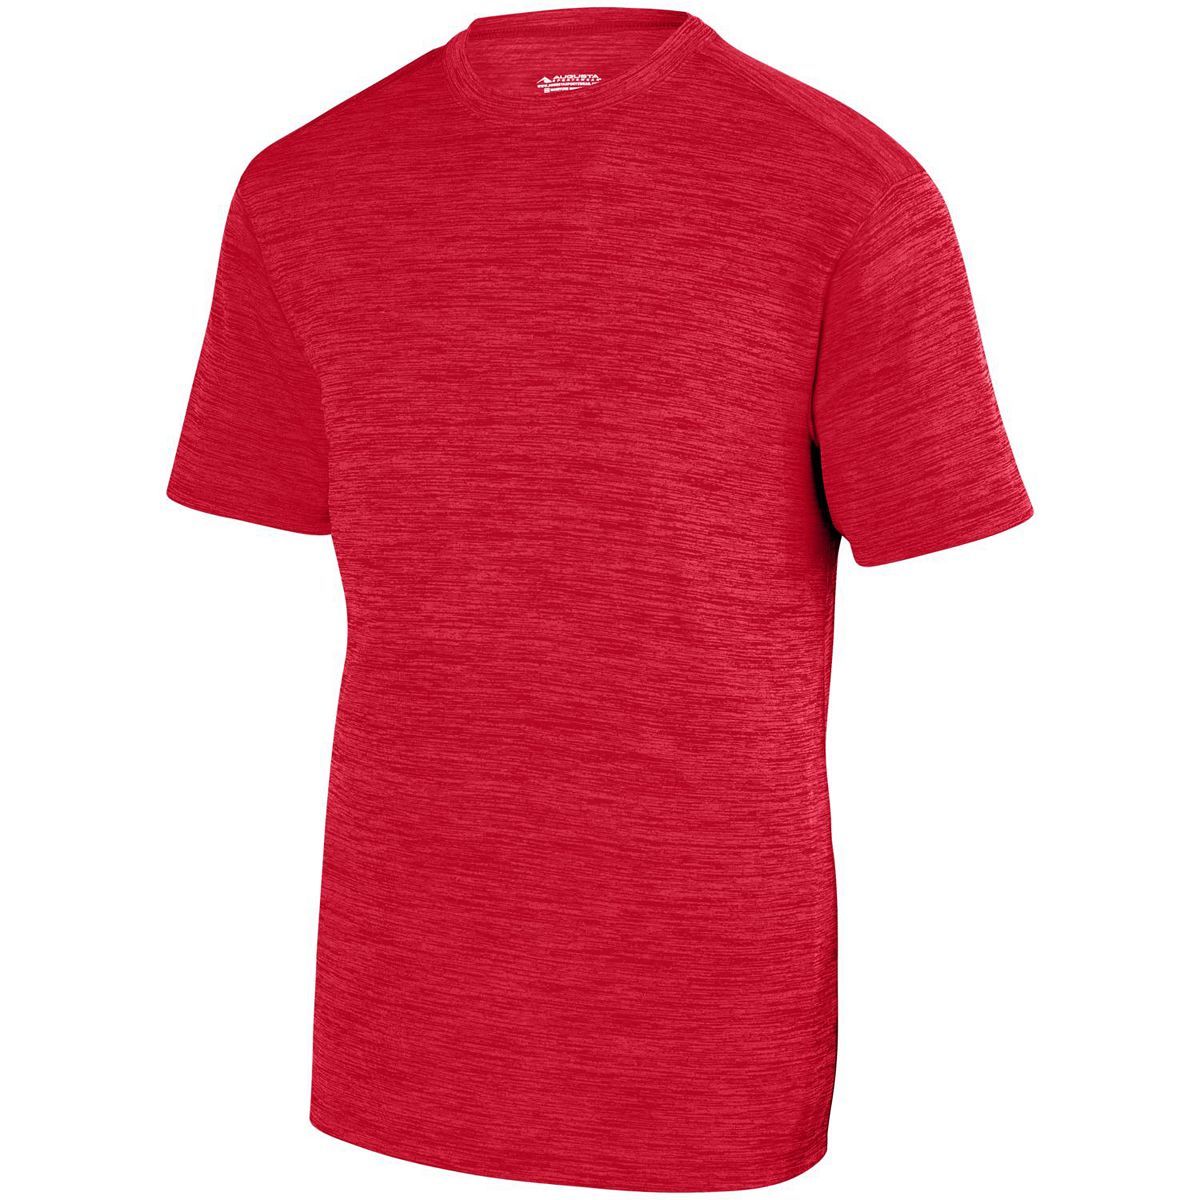 Augusta Sportswear Youth Shadow Tonal Heather Training Tee in Red  -Part of the Youth, Youth-Tee-Shirt, T-Shirts, Augusta-Products, Shirts, Tonal-Fleece-Collection product lines at KanaleyCreations.com